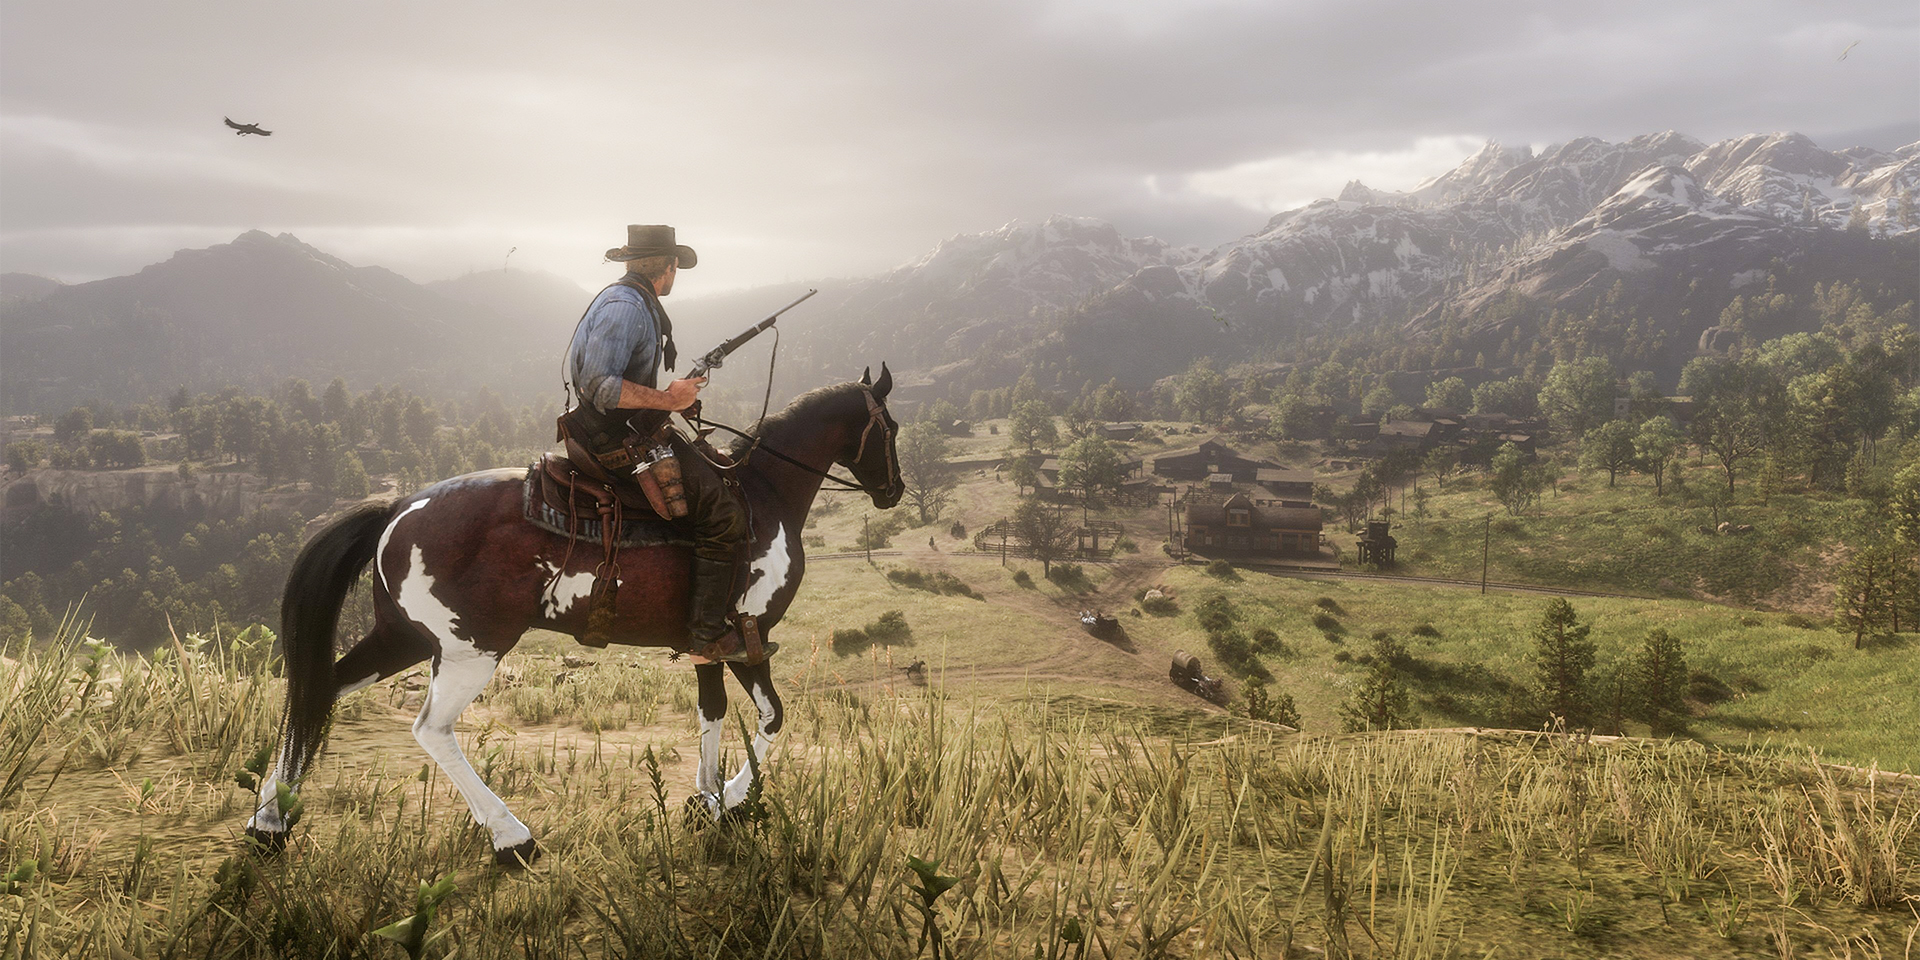 Red Dead Redemption 2' Review: The New King Of Open-World